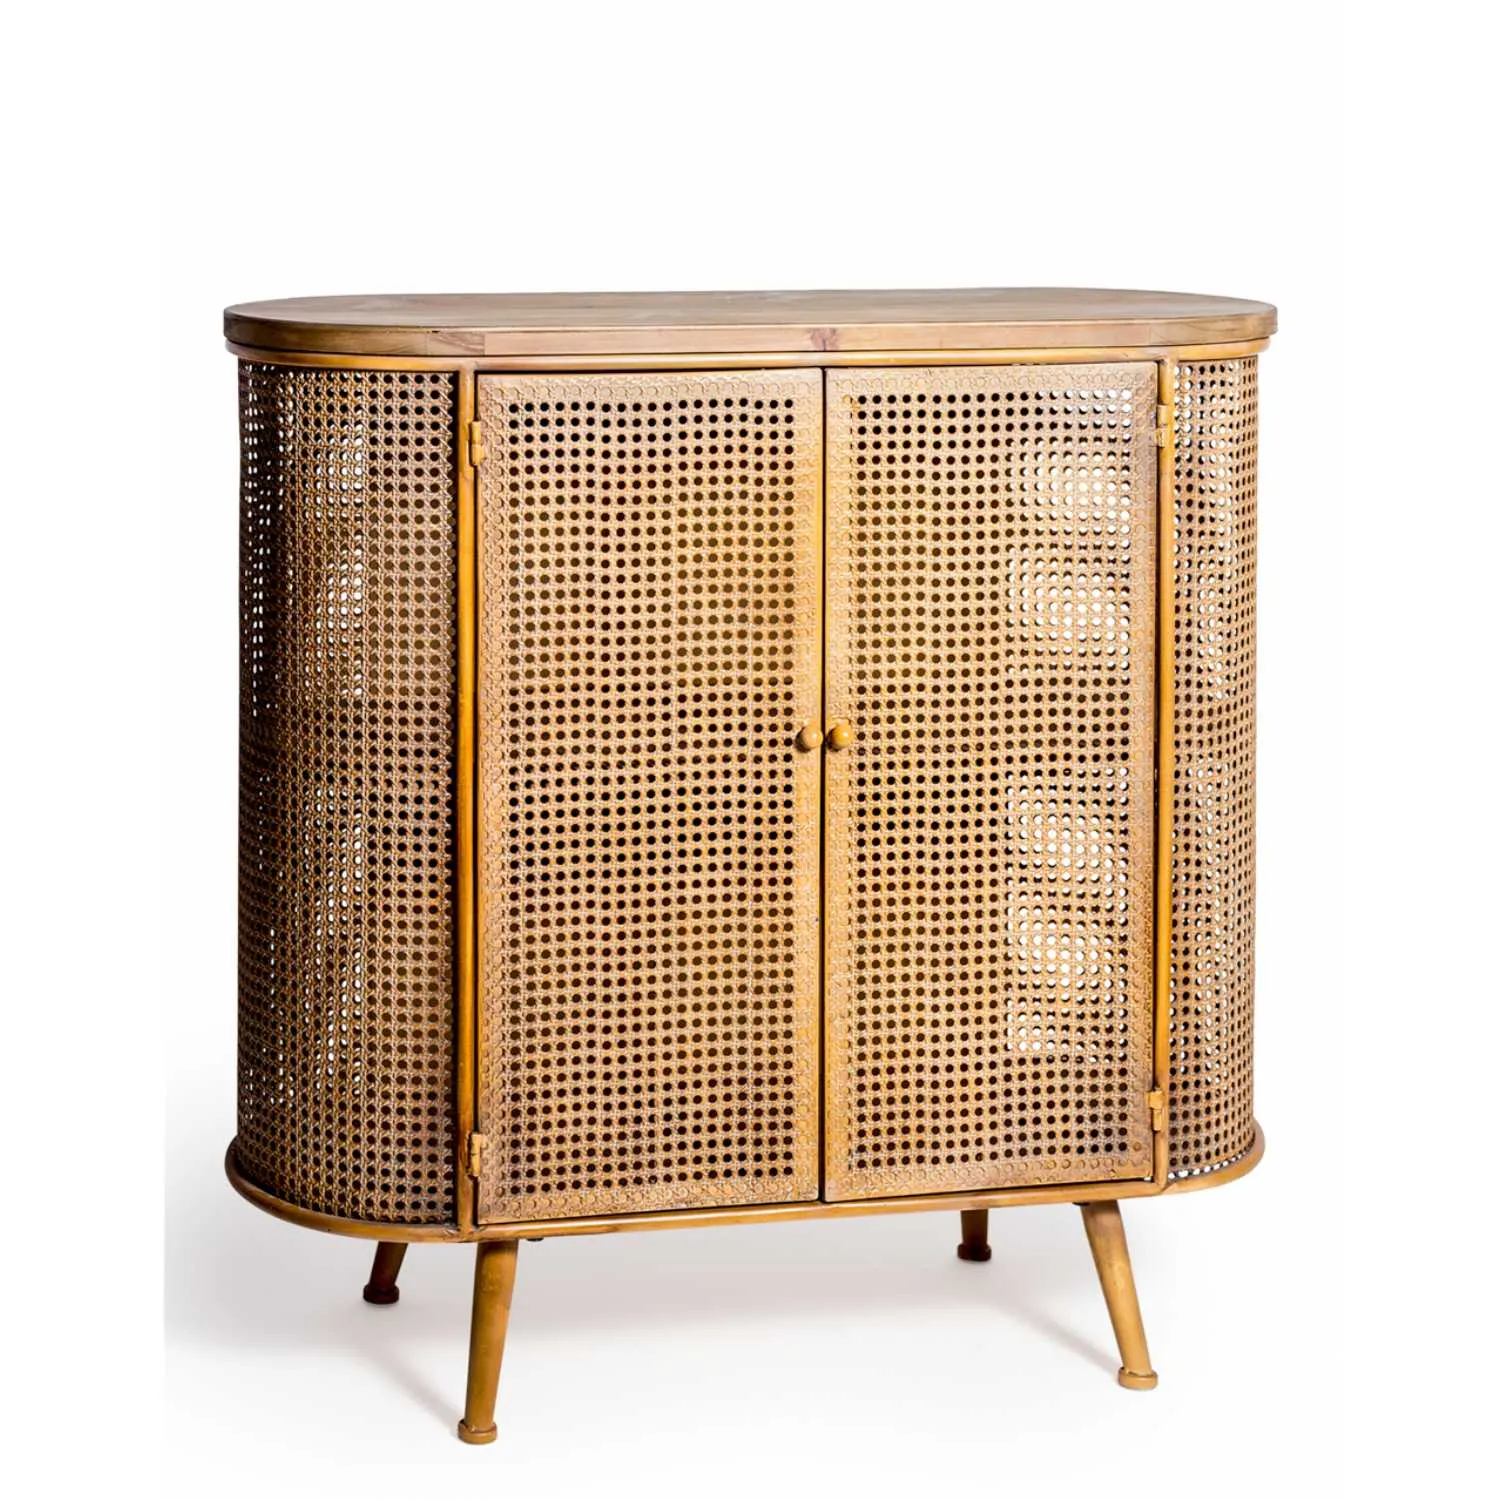 Rustic Metal Rattan And Wood Retro Side Cabinet